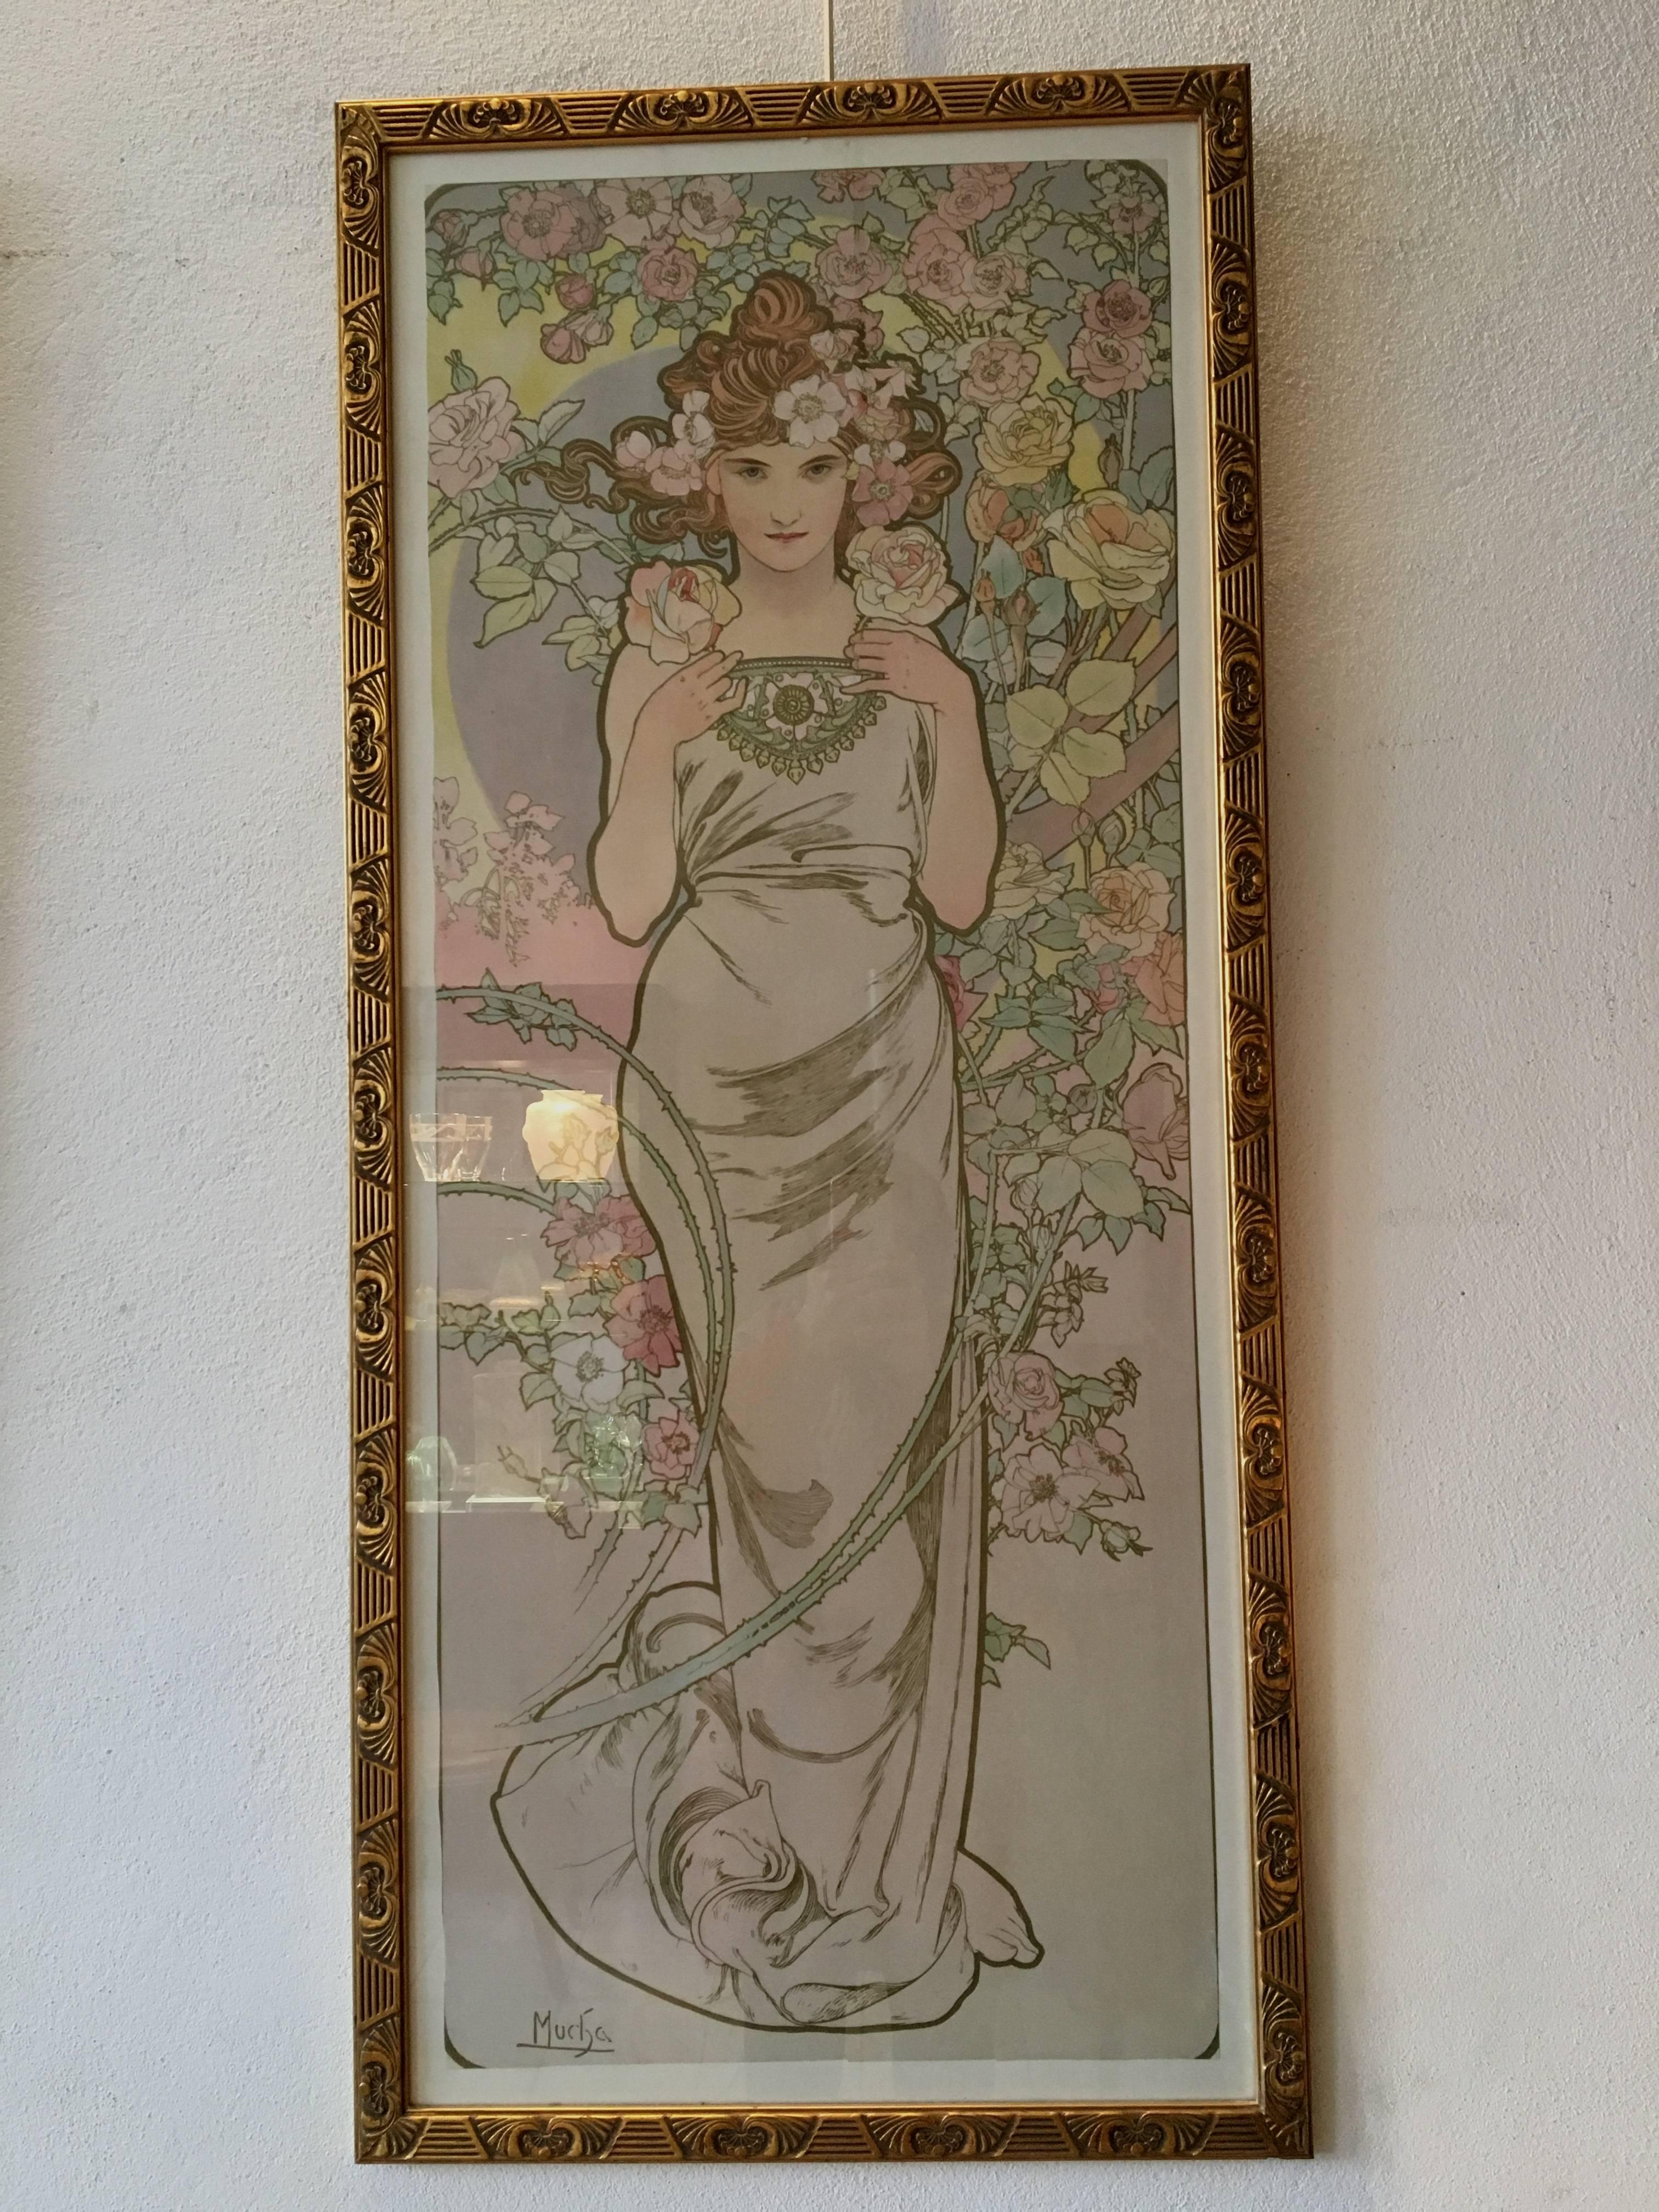 A set of four lithographs by Alphonse Mucha. 